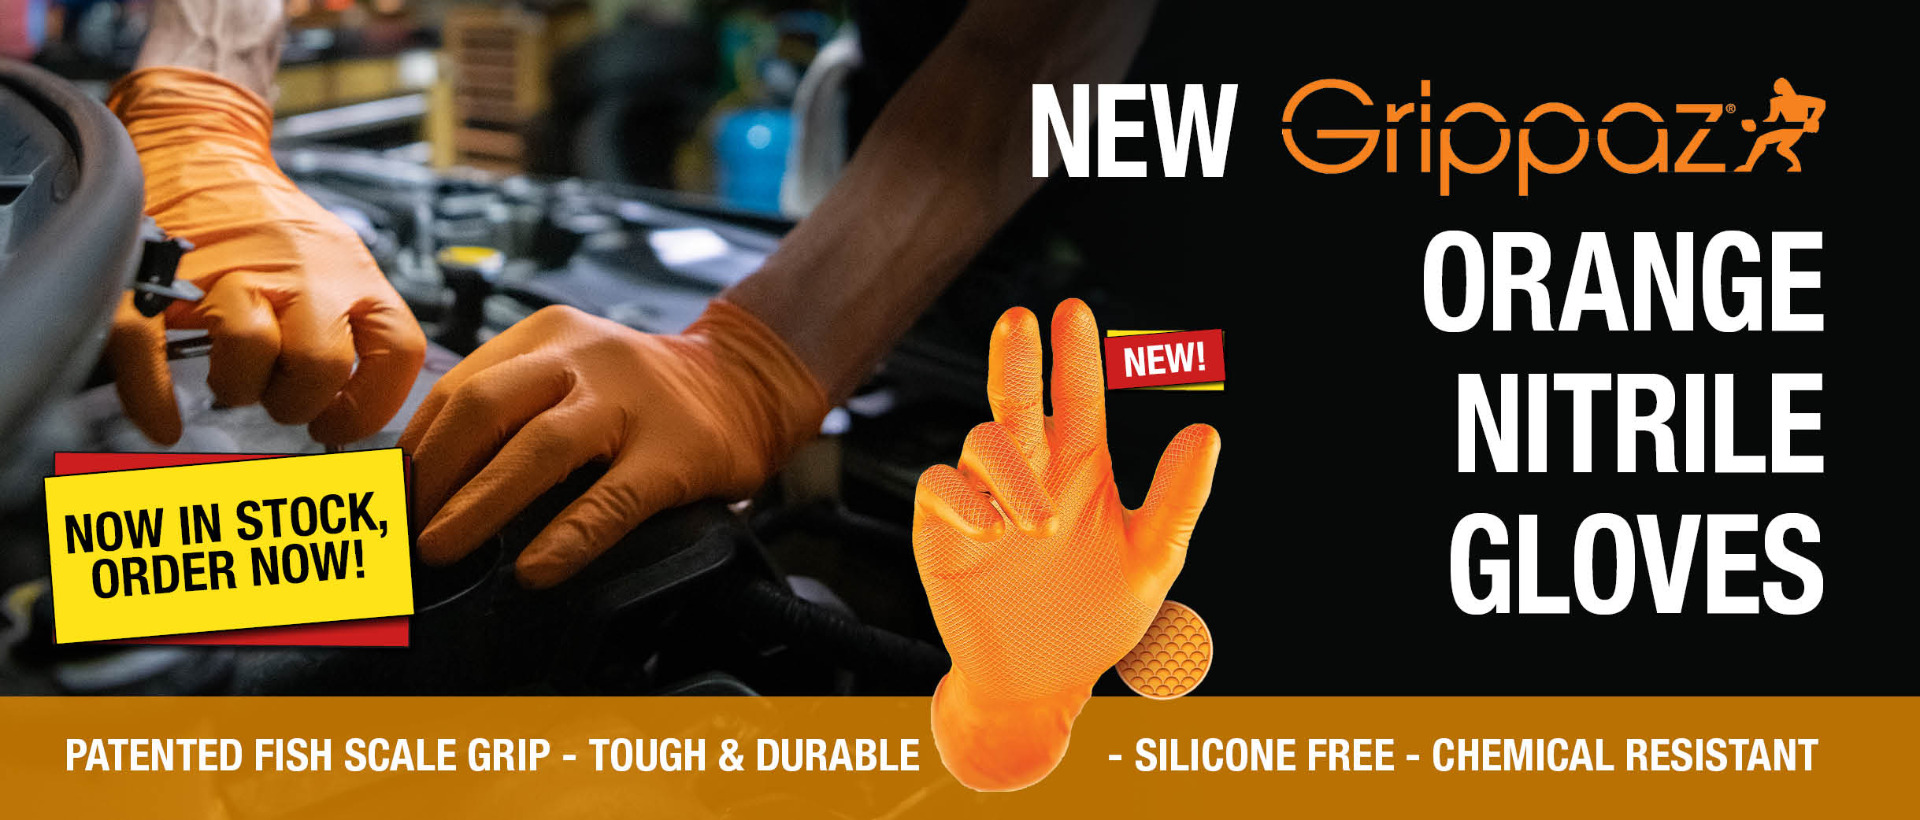 New Grippaz Orange Nitrile Gloves: Patented fish scale grip. Tough and durable. Silicone free. Chemical resistant. Now in stock, order now!